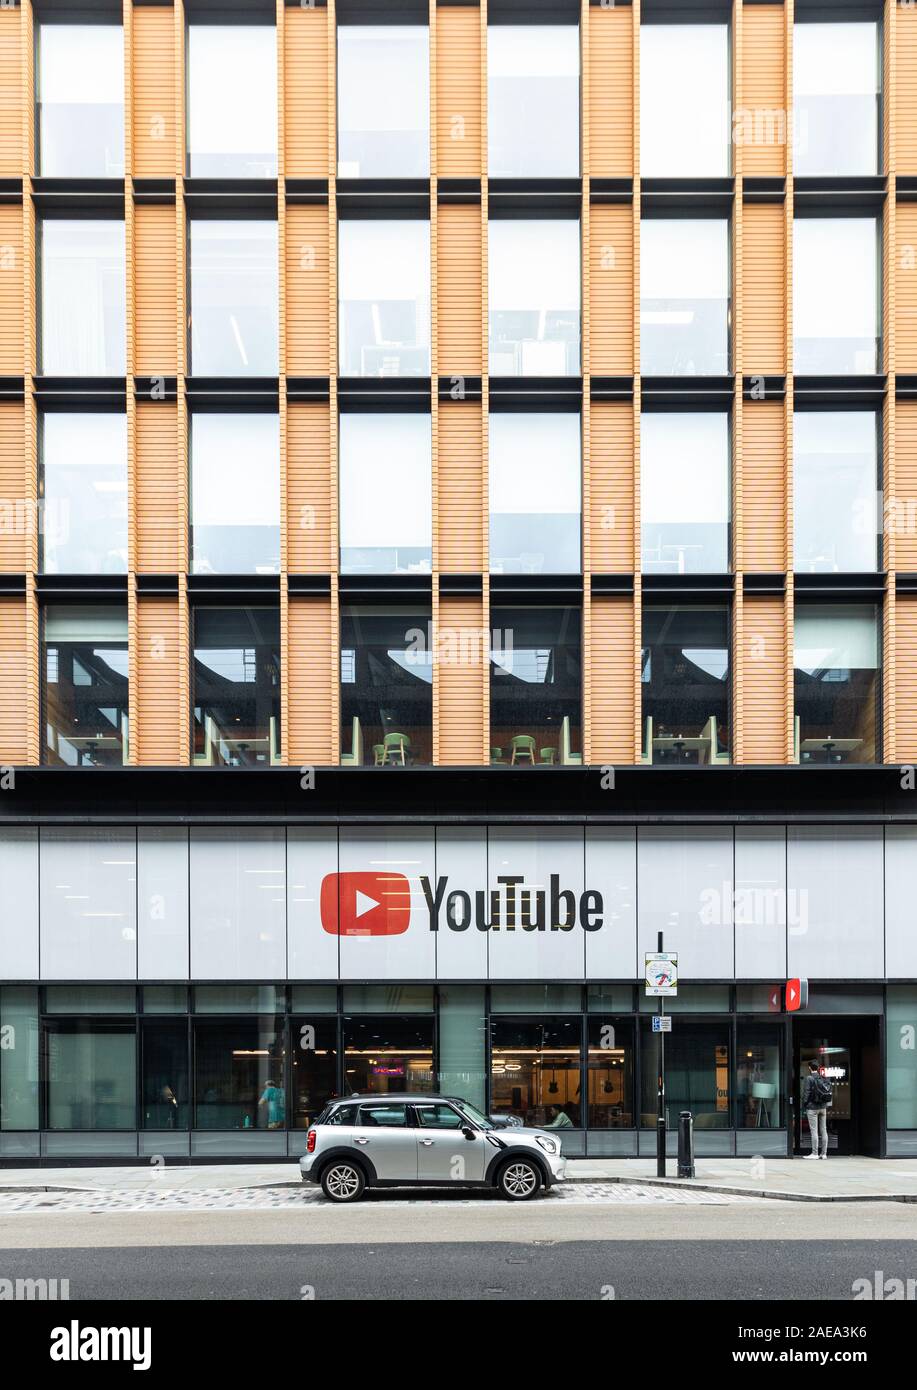 The You Tube headquarters in London Kings Cross Stock Photo